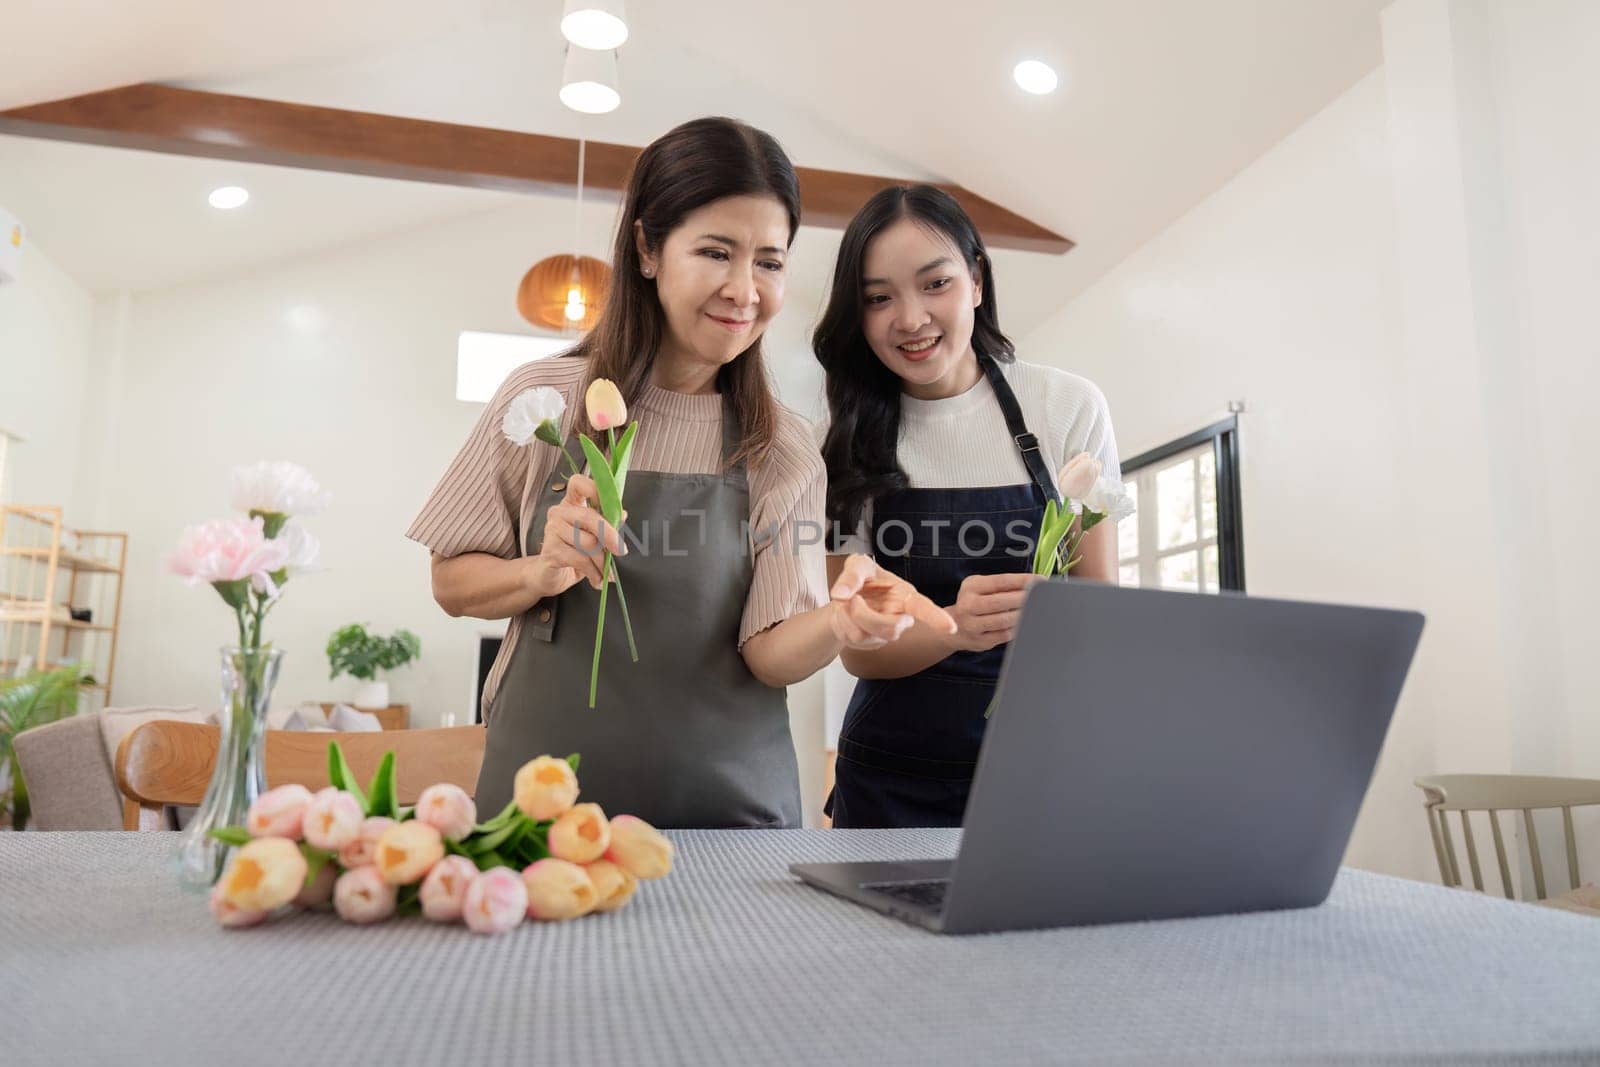 Happy mother and daughter arranging flower in vase at table in house do activities together on Mother's day by nateemee